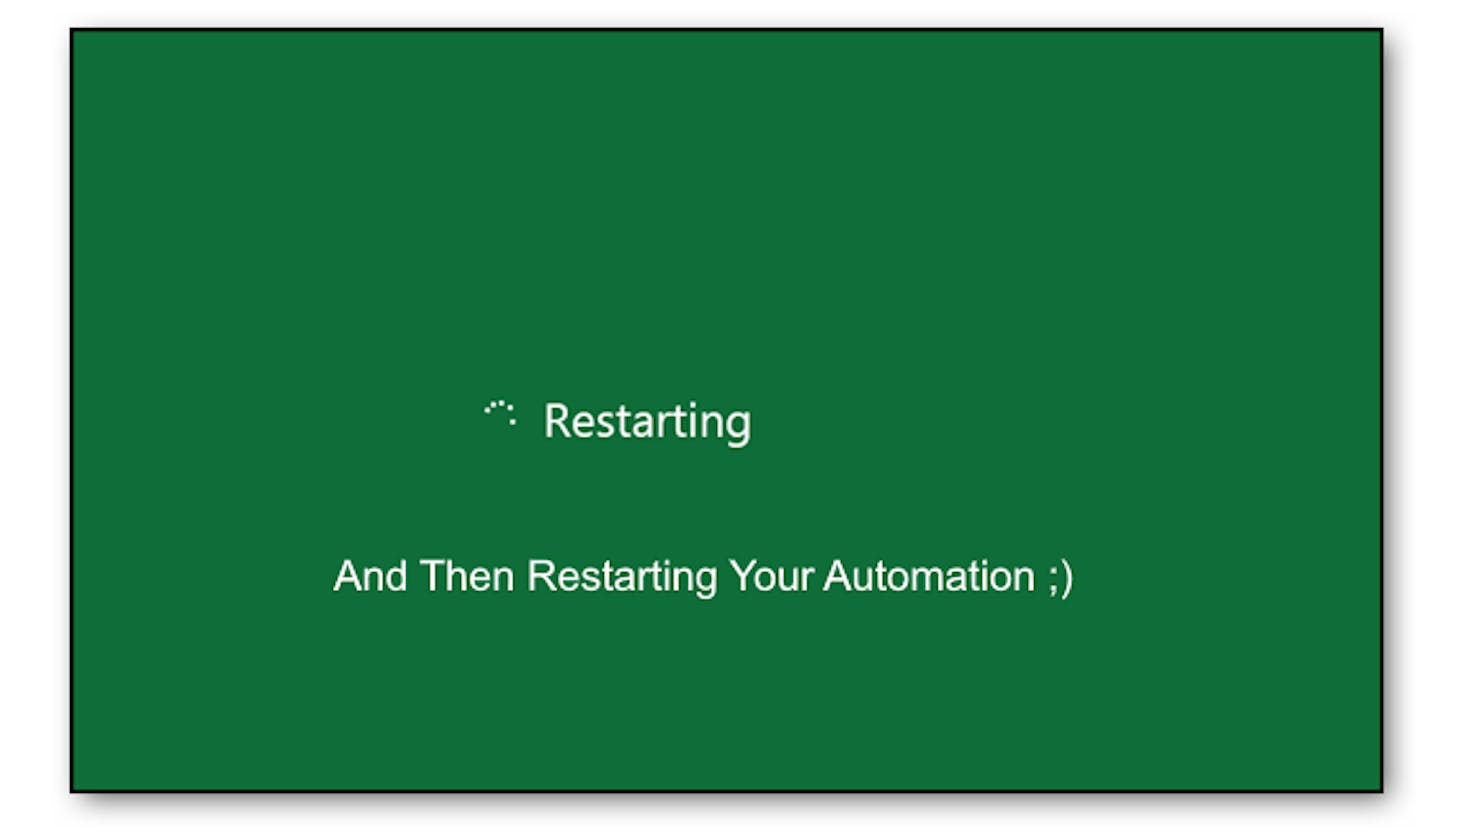 Continue Your Automation To Run Once After Restarting a Headless Windows System